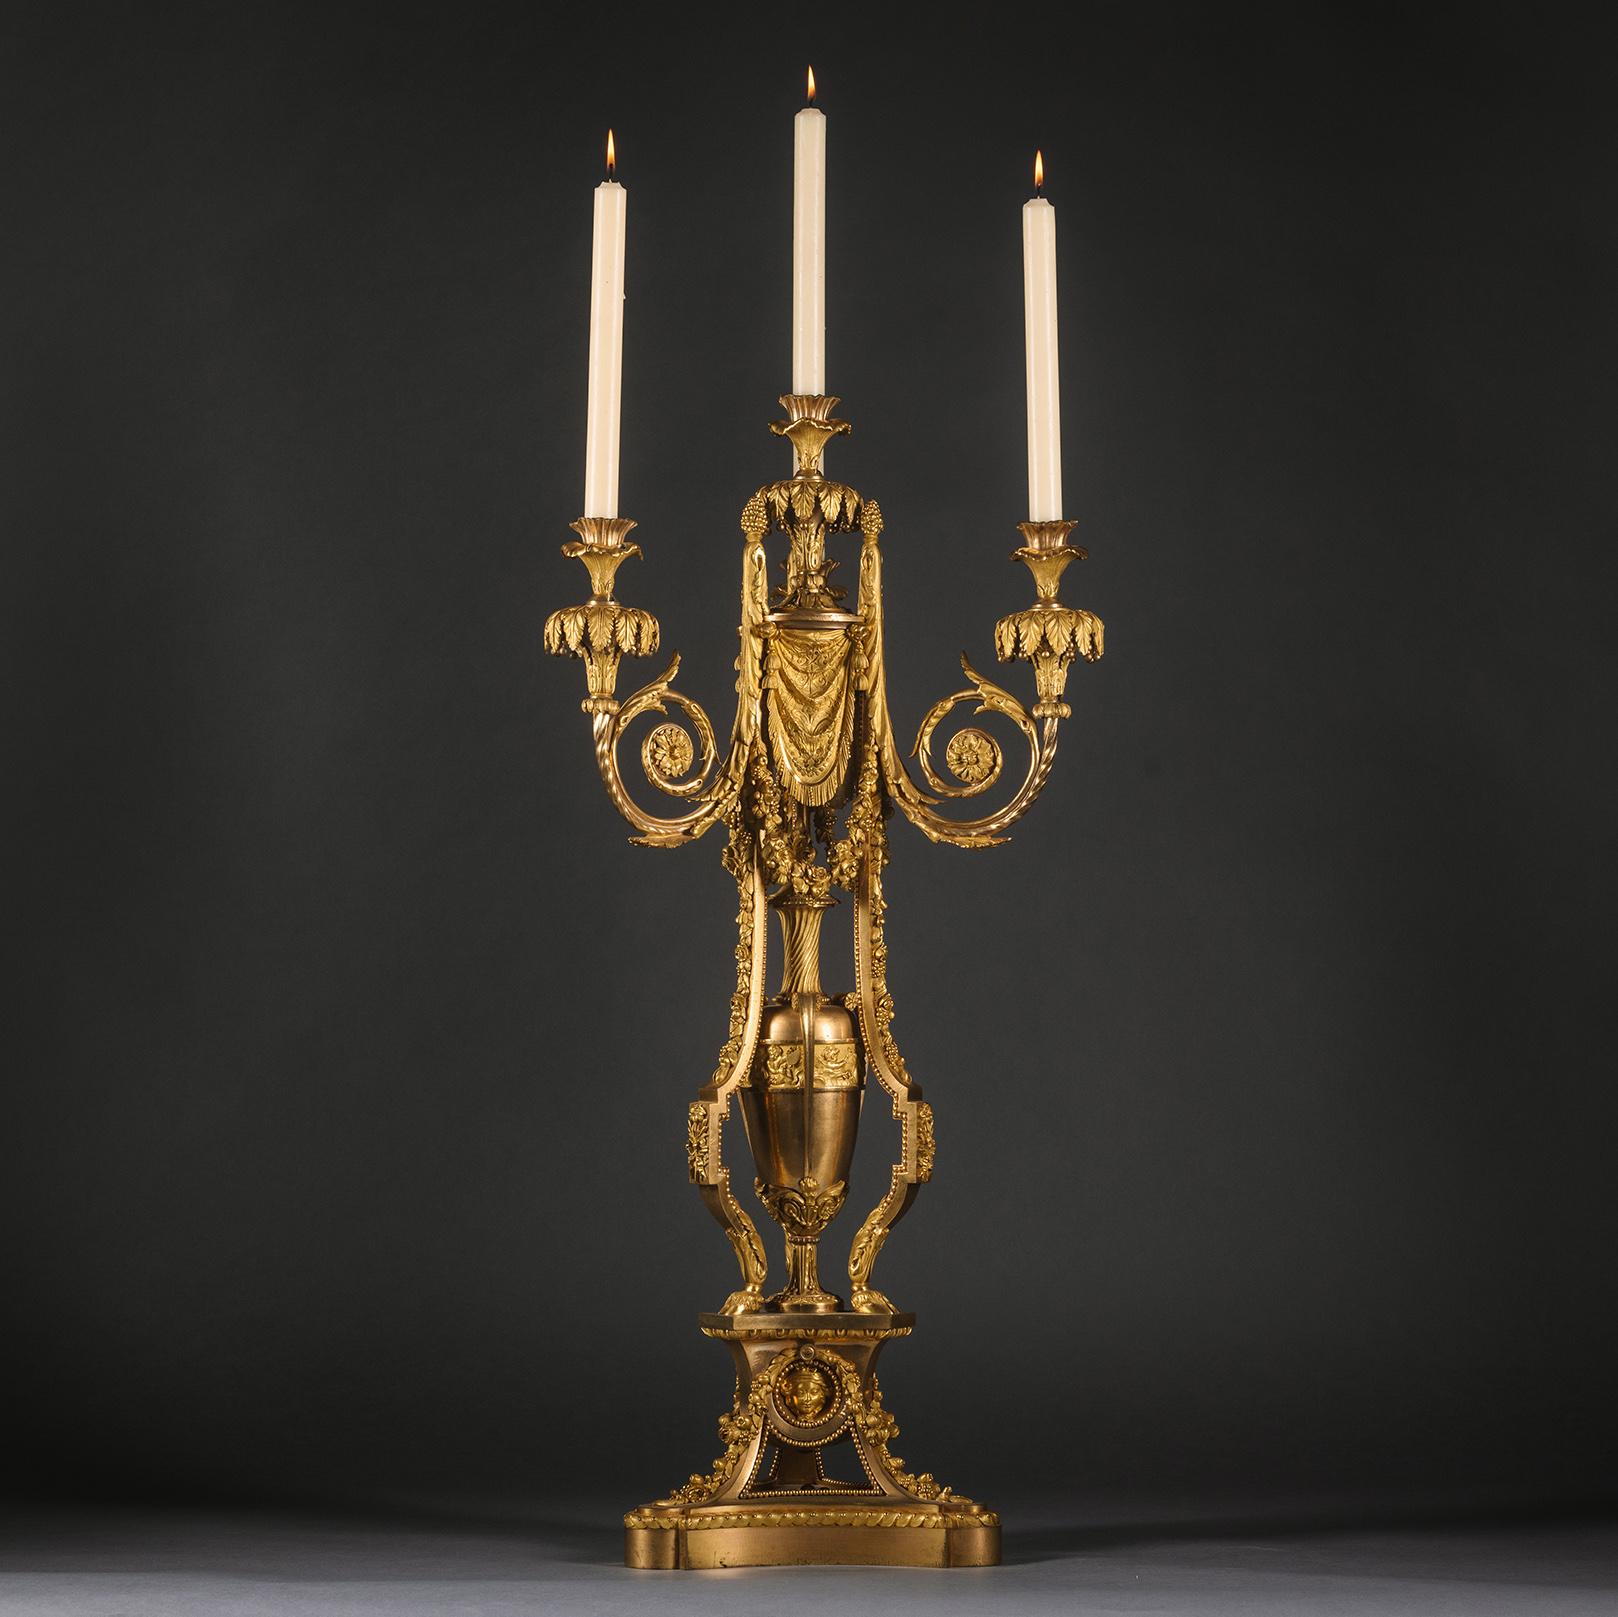 A Large and Impressive Louis XVI Style gilt-bronze four-light candelabrum, After the Model Attributed to Pierre Gouthière.

Finely cast and gilded with a central stem issuing three acanthus-wrapped scrolled branches, with leaf-cast drip-pans and